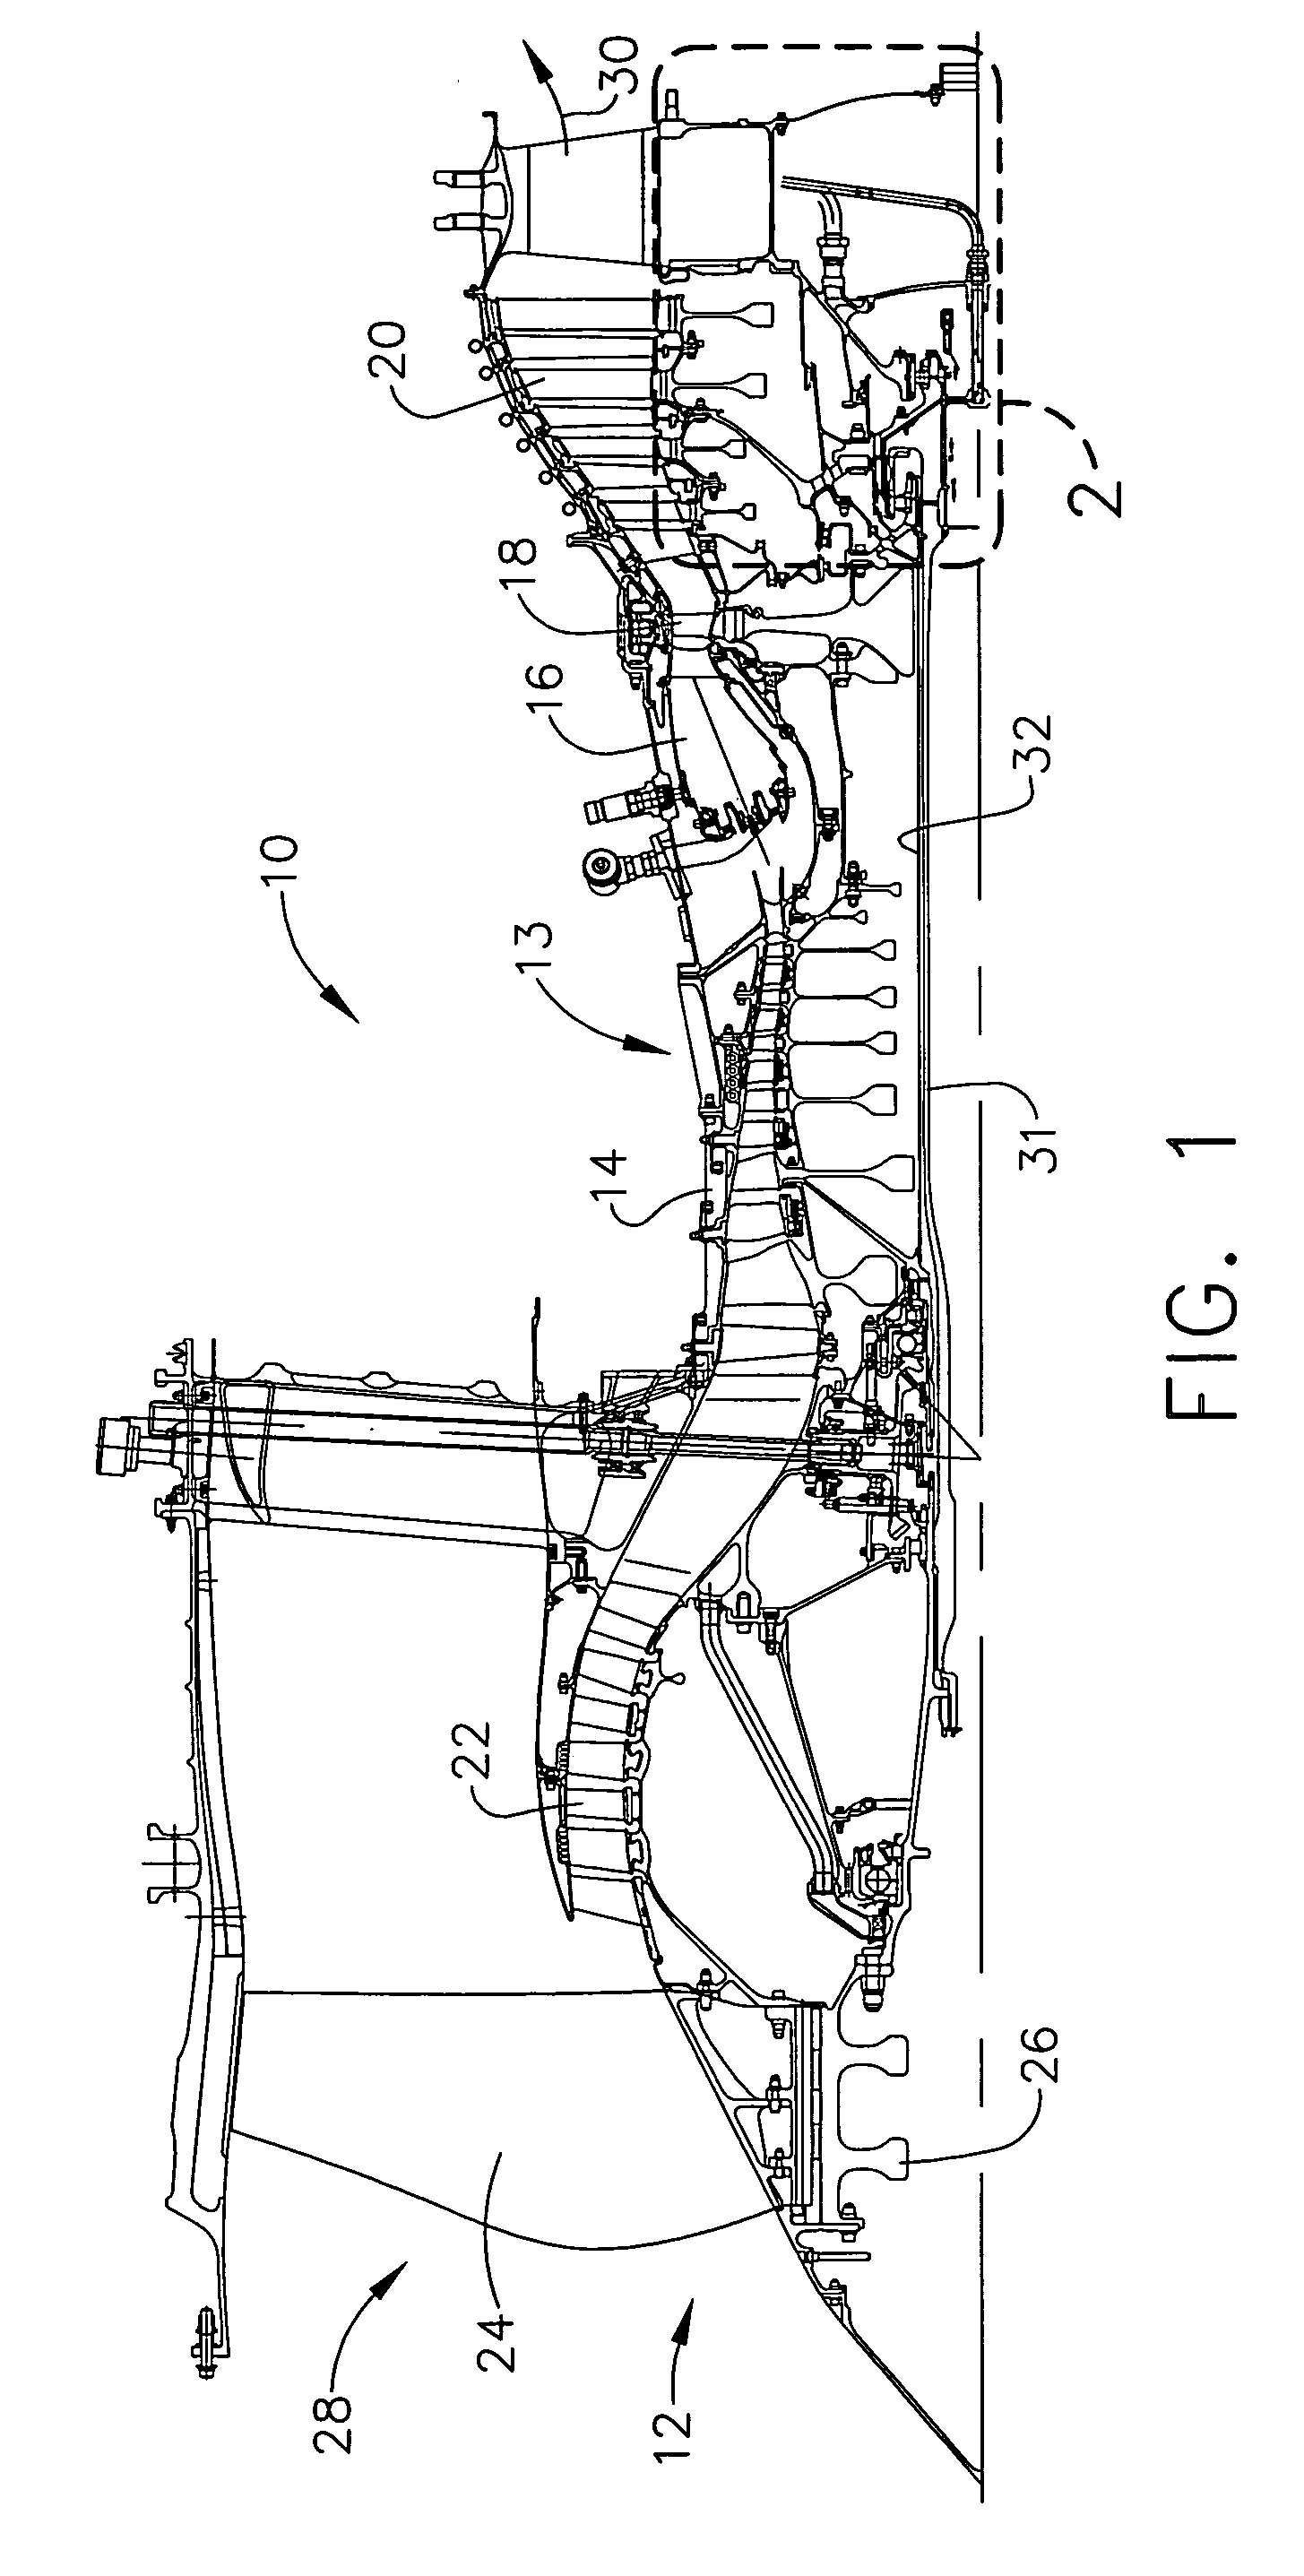 Gas turbine engine assembly and methods of assembling same